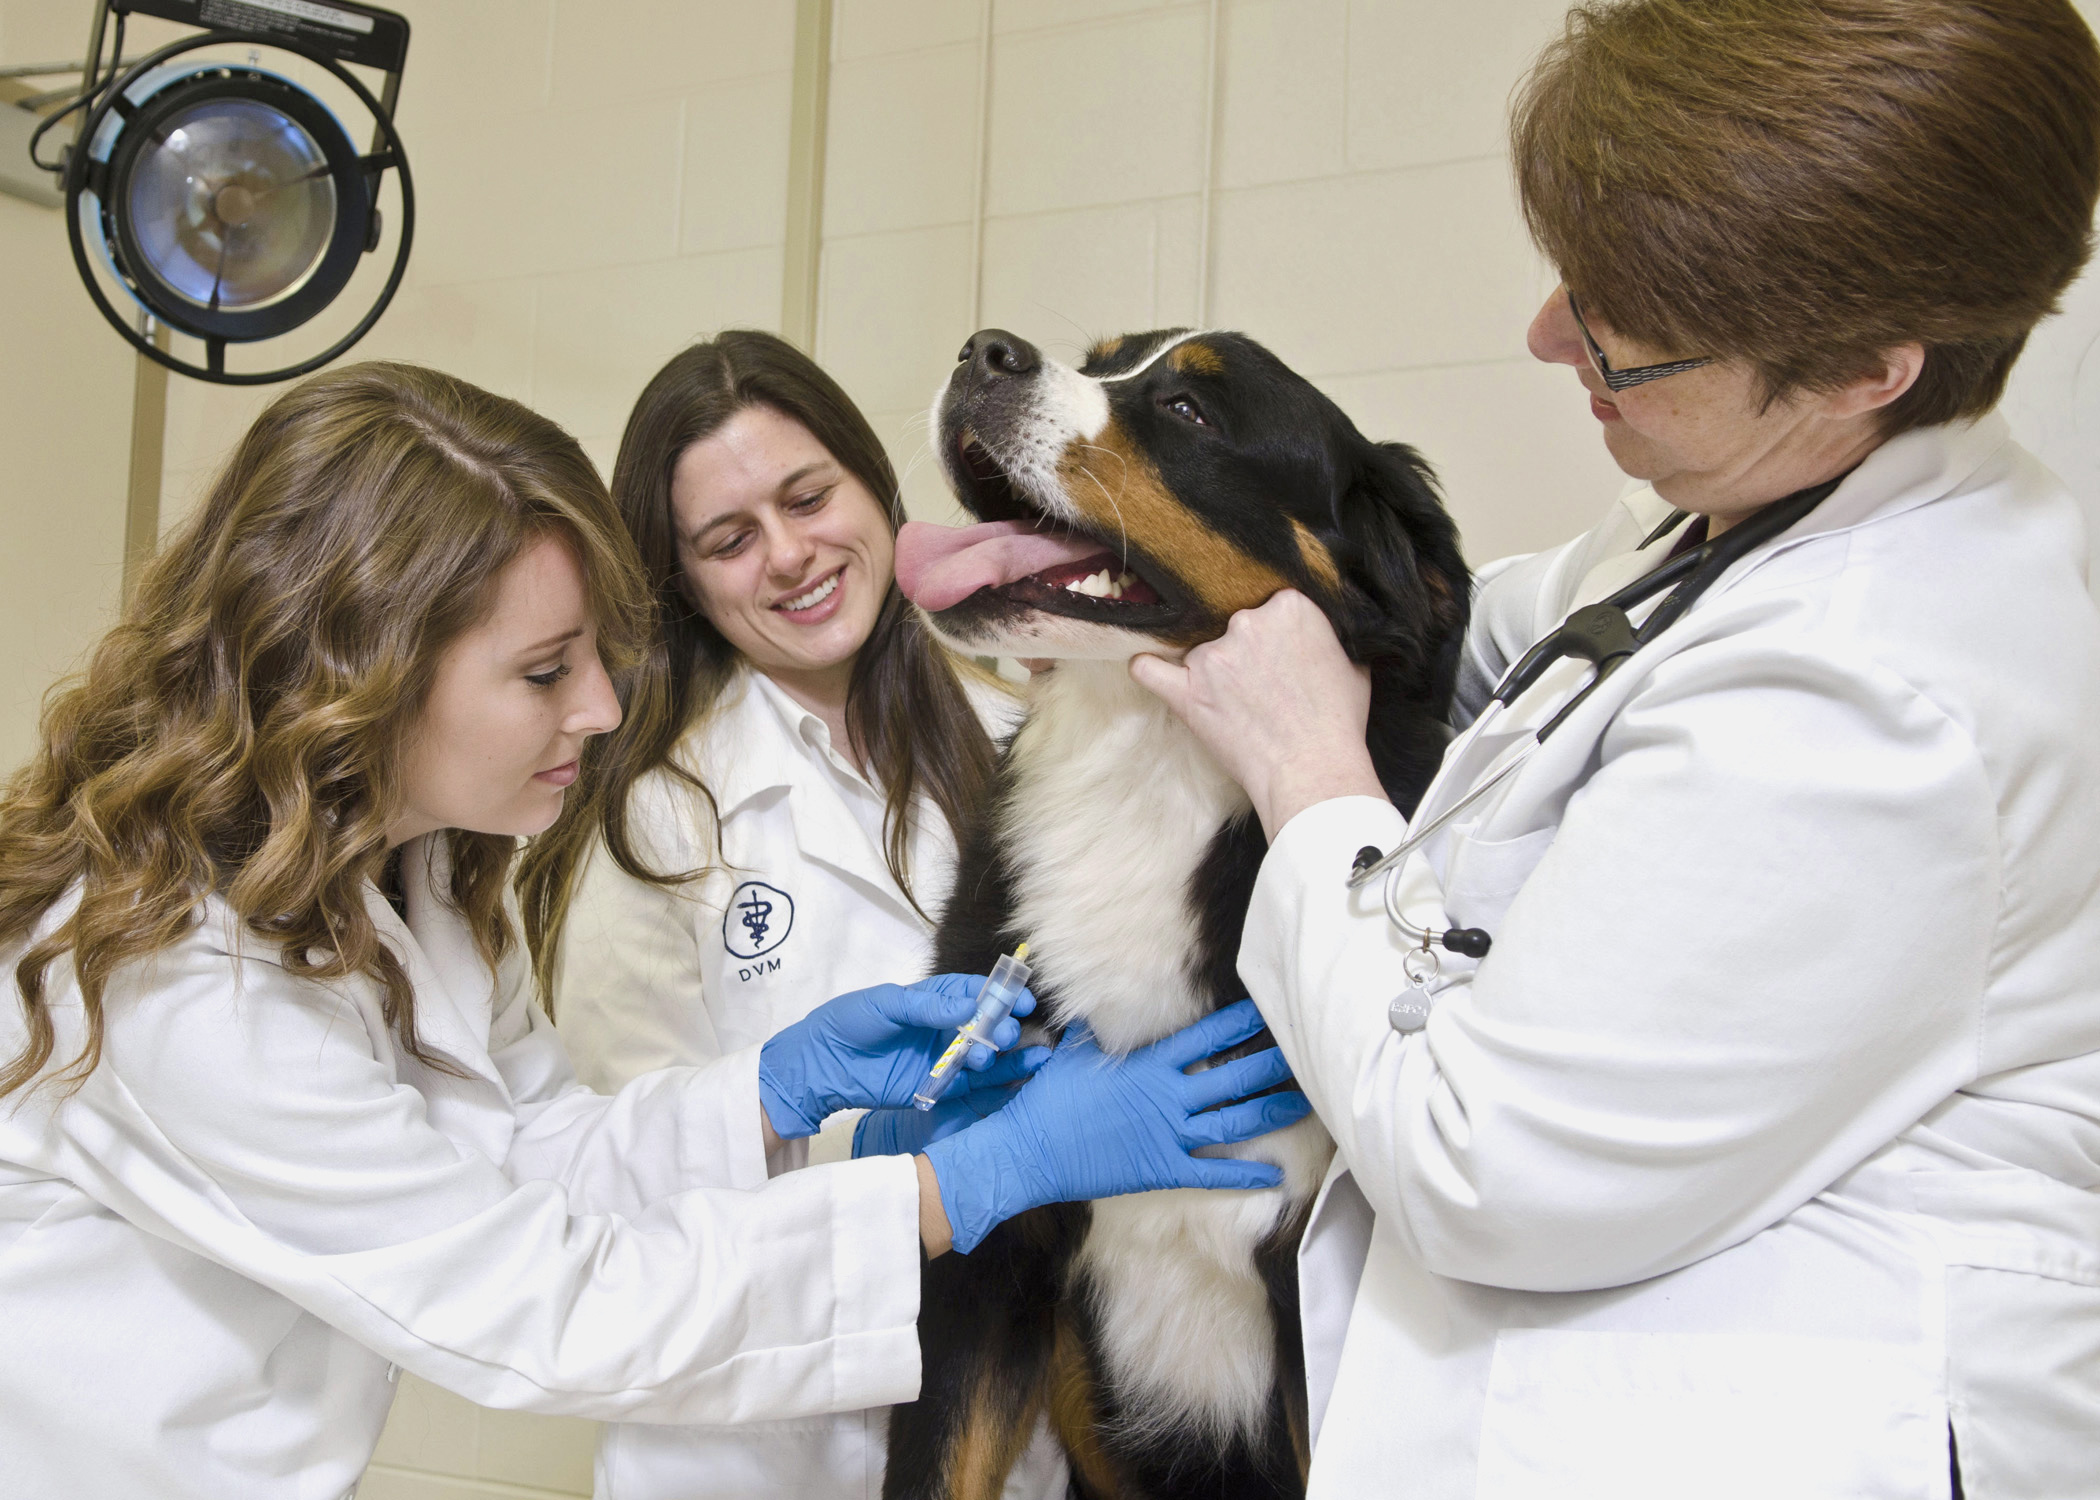 MSU veterinary medicine doctoral student Shauna Trichler (l) takes a blood sample from a patient with assistance from research resident Sandra Bulla (c) and Dr. Kari Lunsford. They are part of a College of Veterinary Medicine team studying the role of platelets in diagnosing canine cancer. 